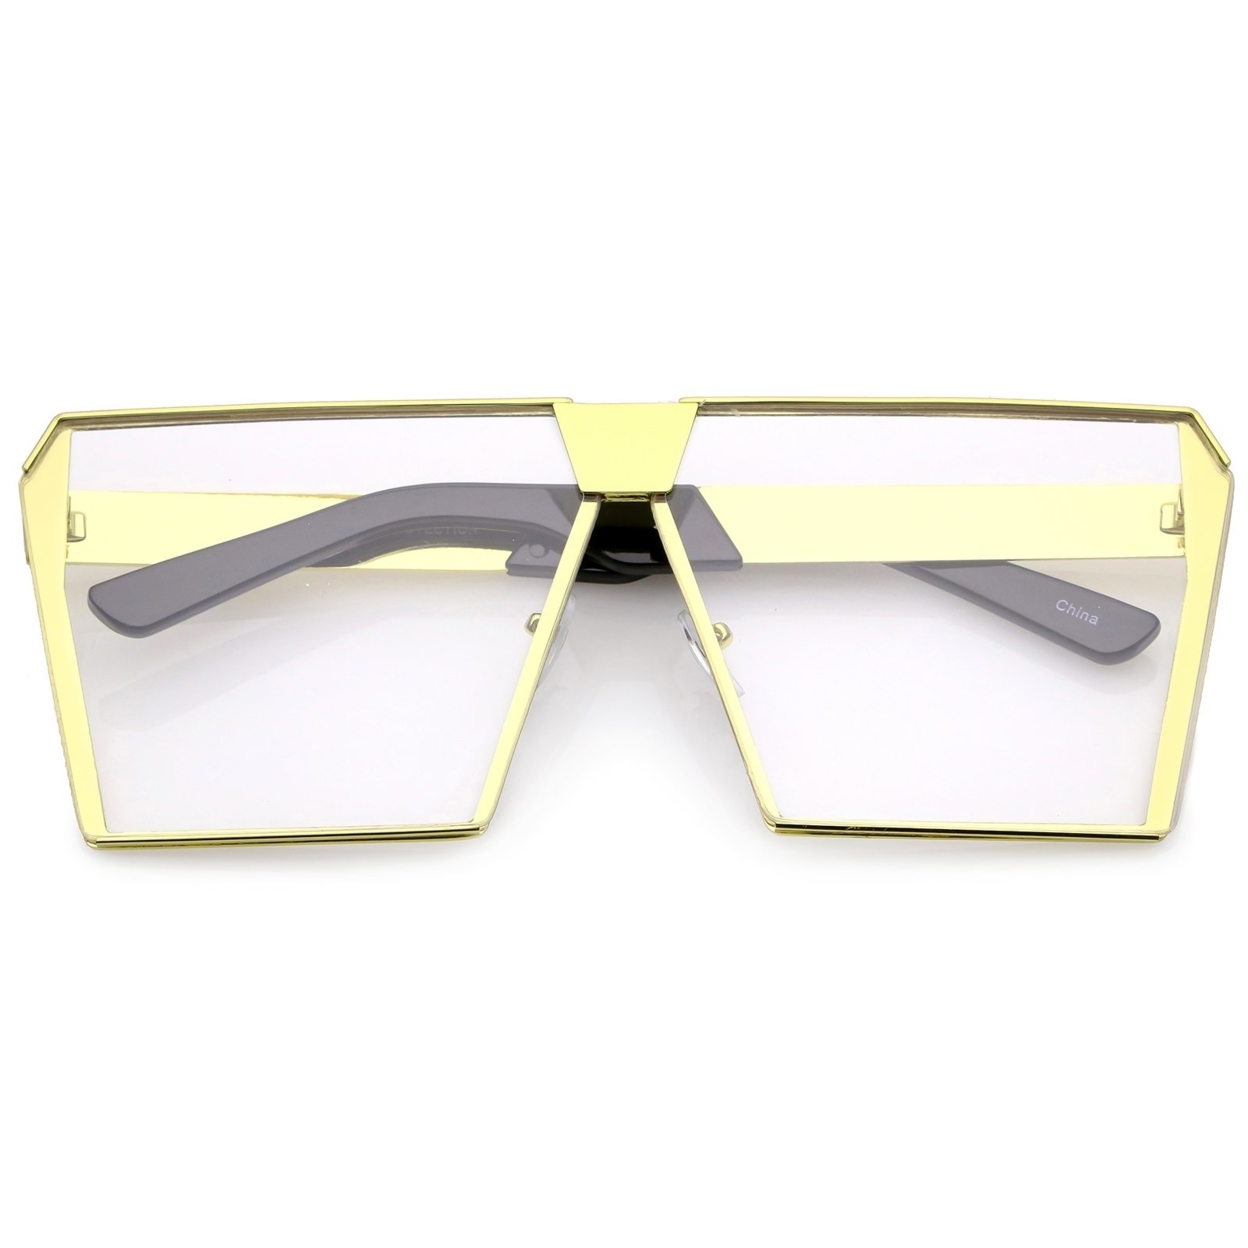 Modern Oversize Semi Rimless Square Eyeglasses With Clear Flat Lens 69mm - Yellow Gold / Clear